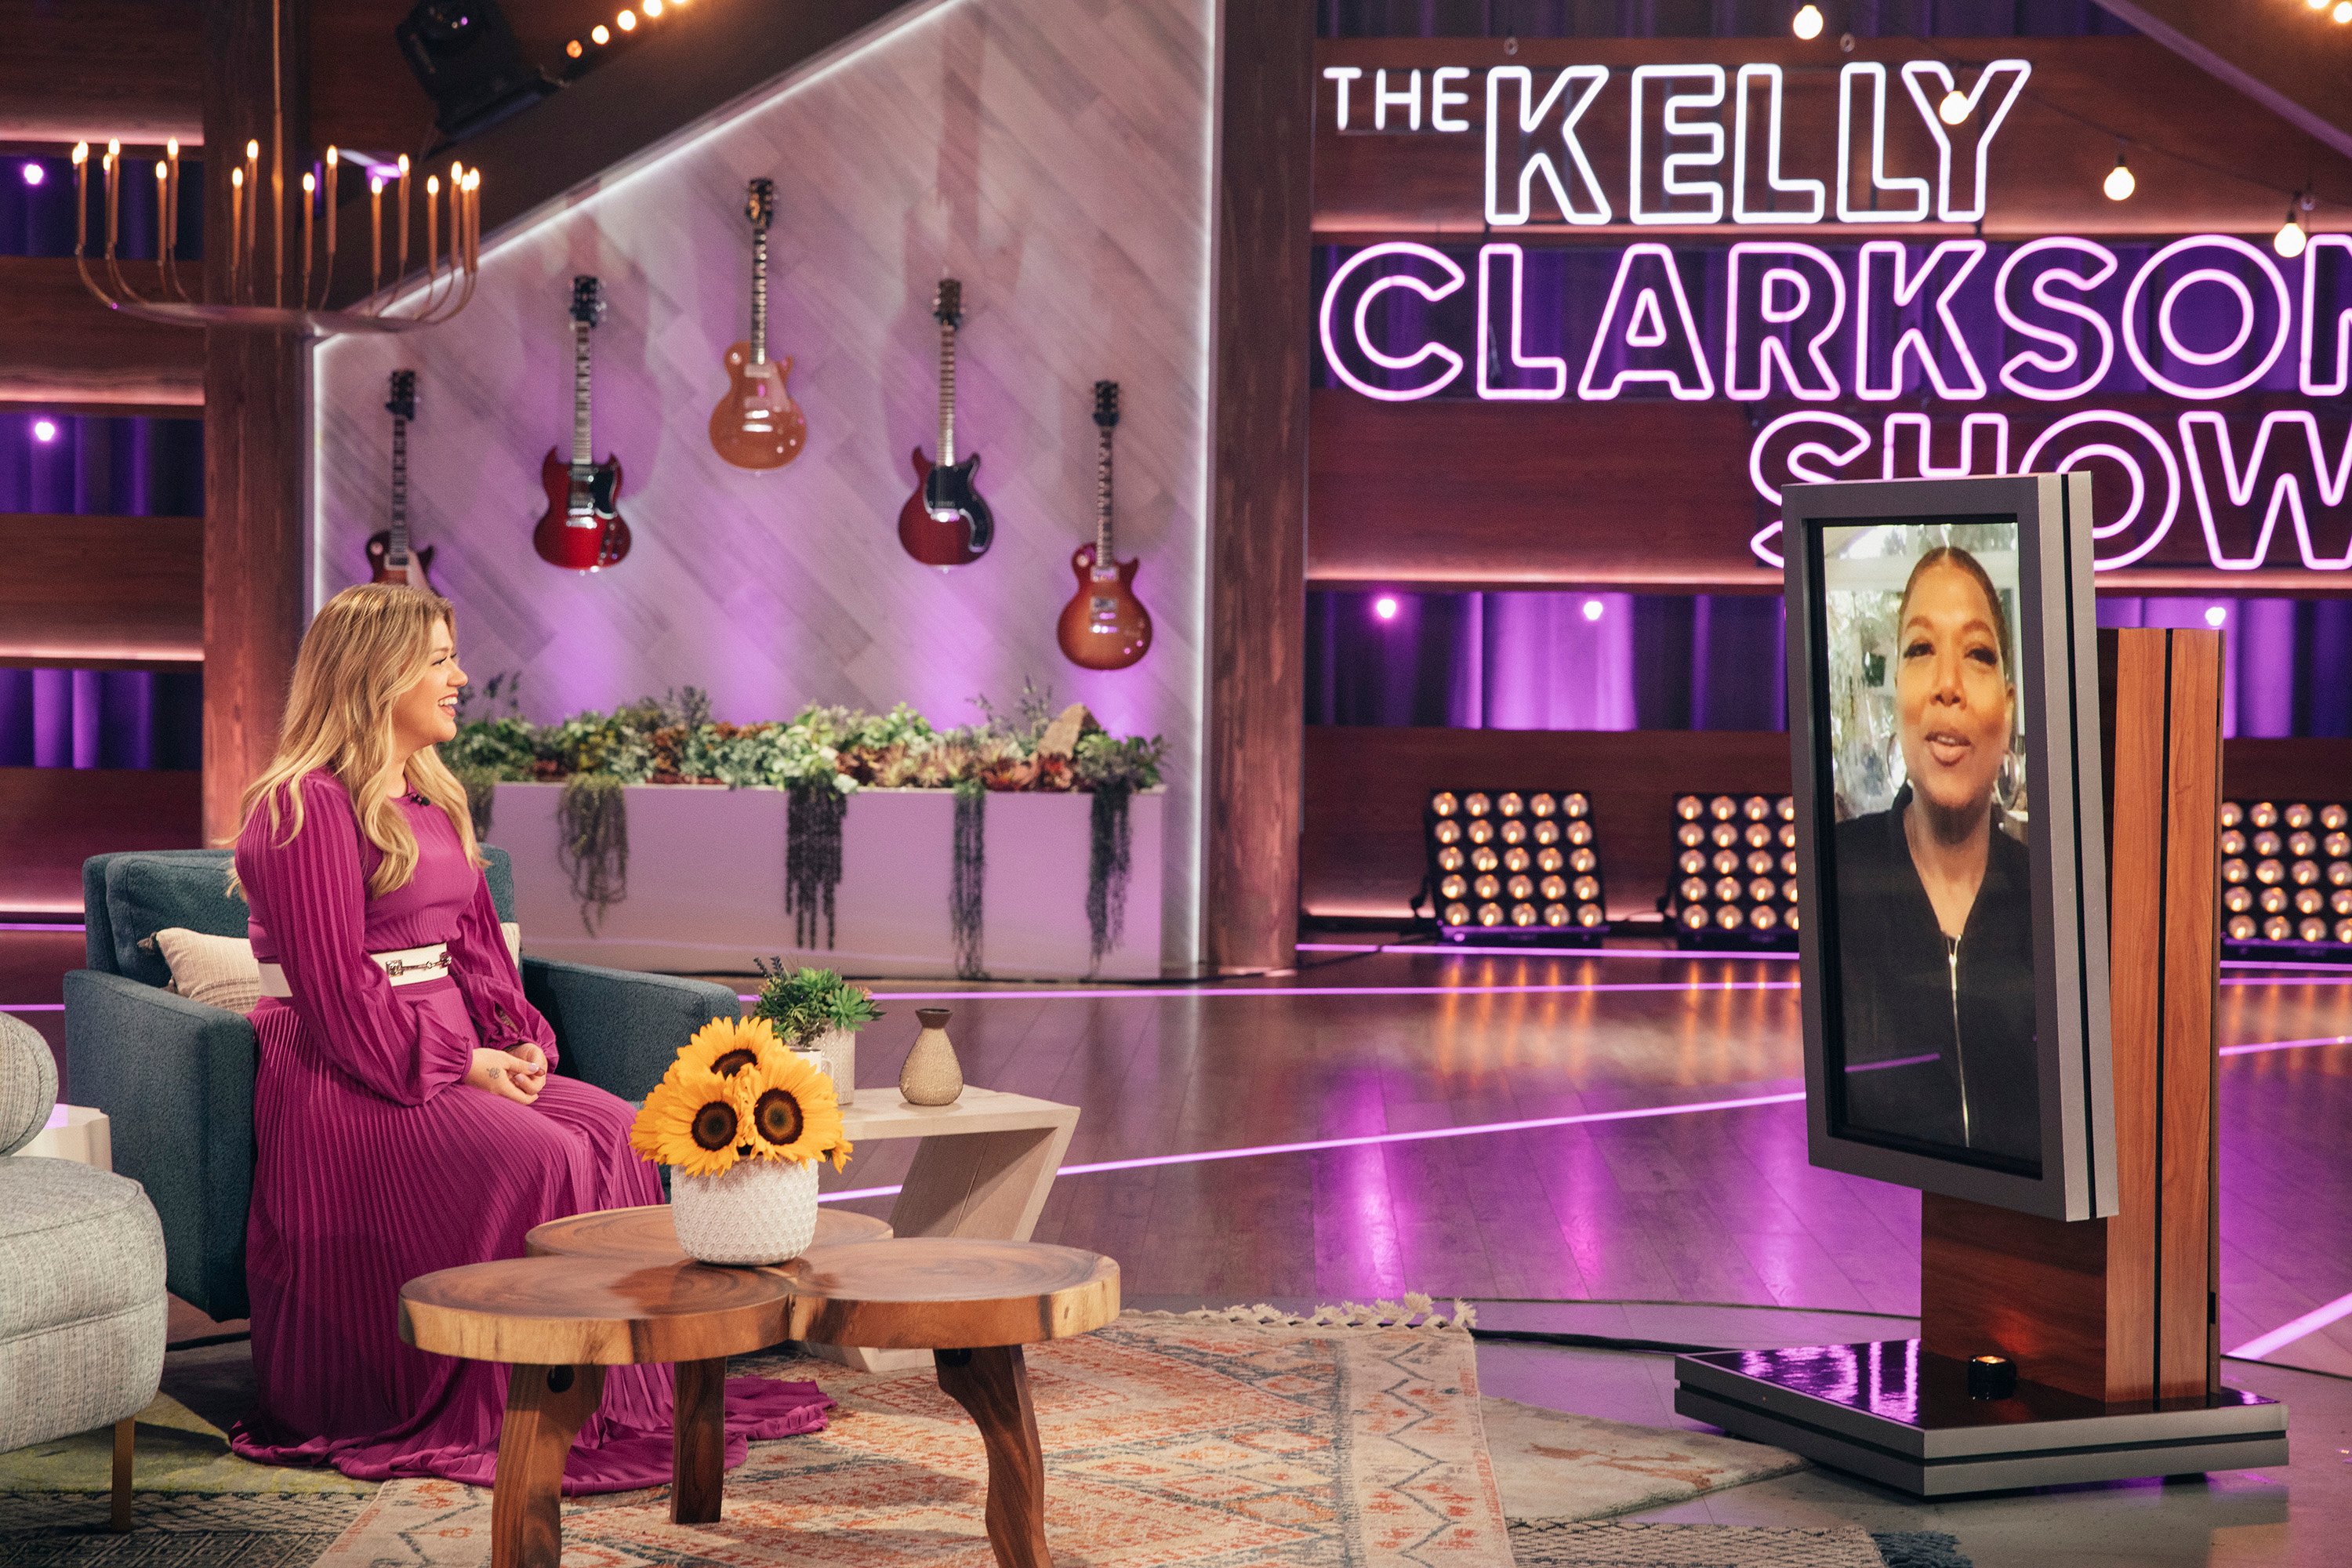 Kelly Clarkson and Queen Latifah on 'The Kelly Clarkson Show'